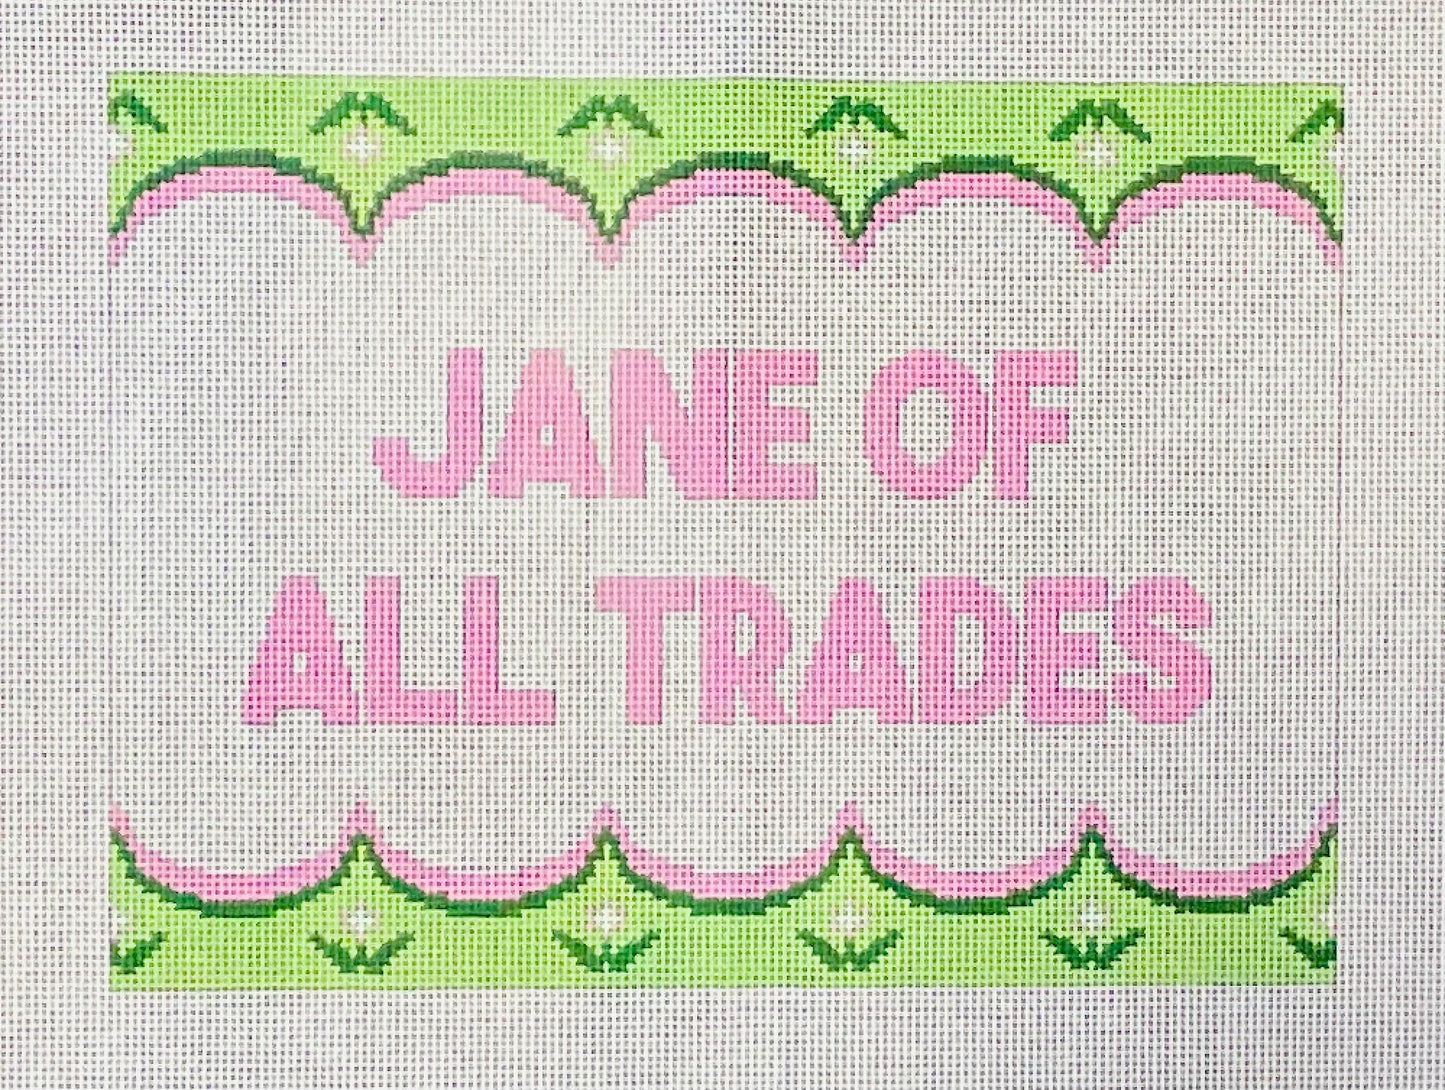 Jane of All Trades